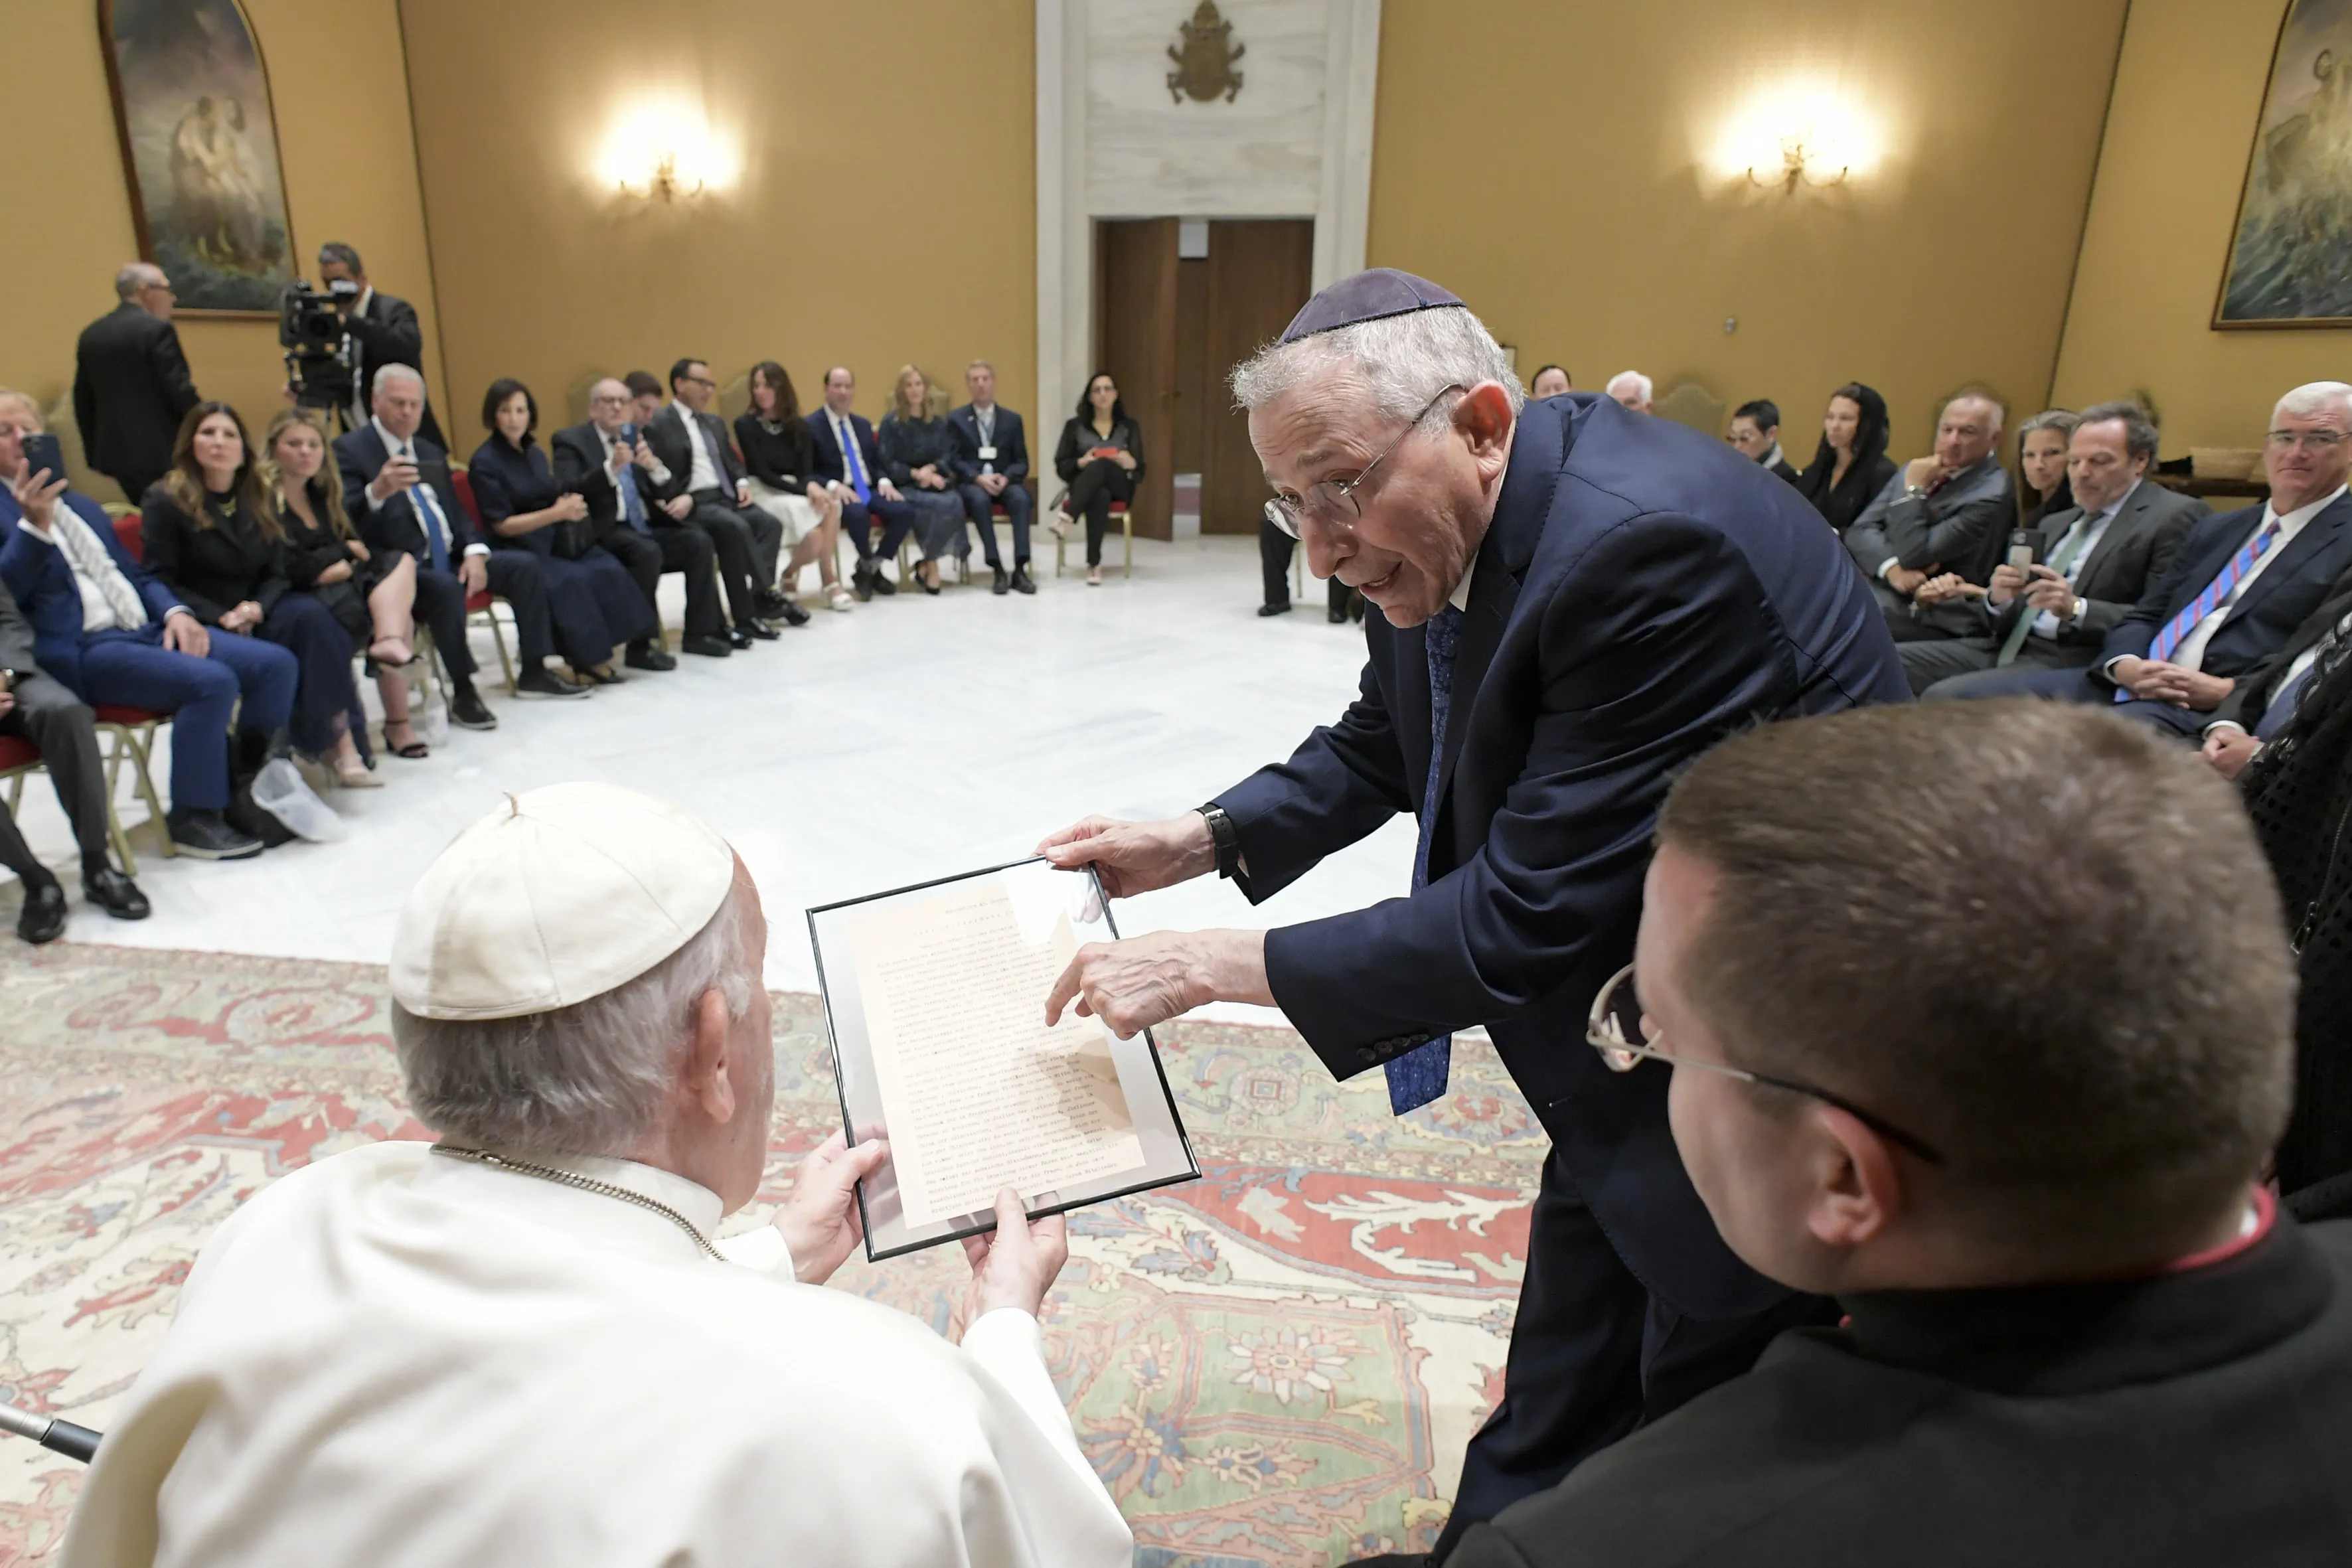 Pope Francis receives a facsimile of a 1919 letter by Adolf Hitler for the Vatican archives during an audience with a delegation of Simon Wiesenthal Center at the Vatican, June 22, 2022.?w=200&h=150